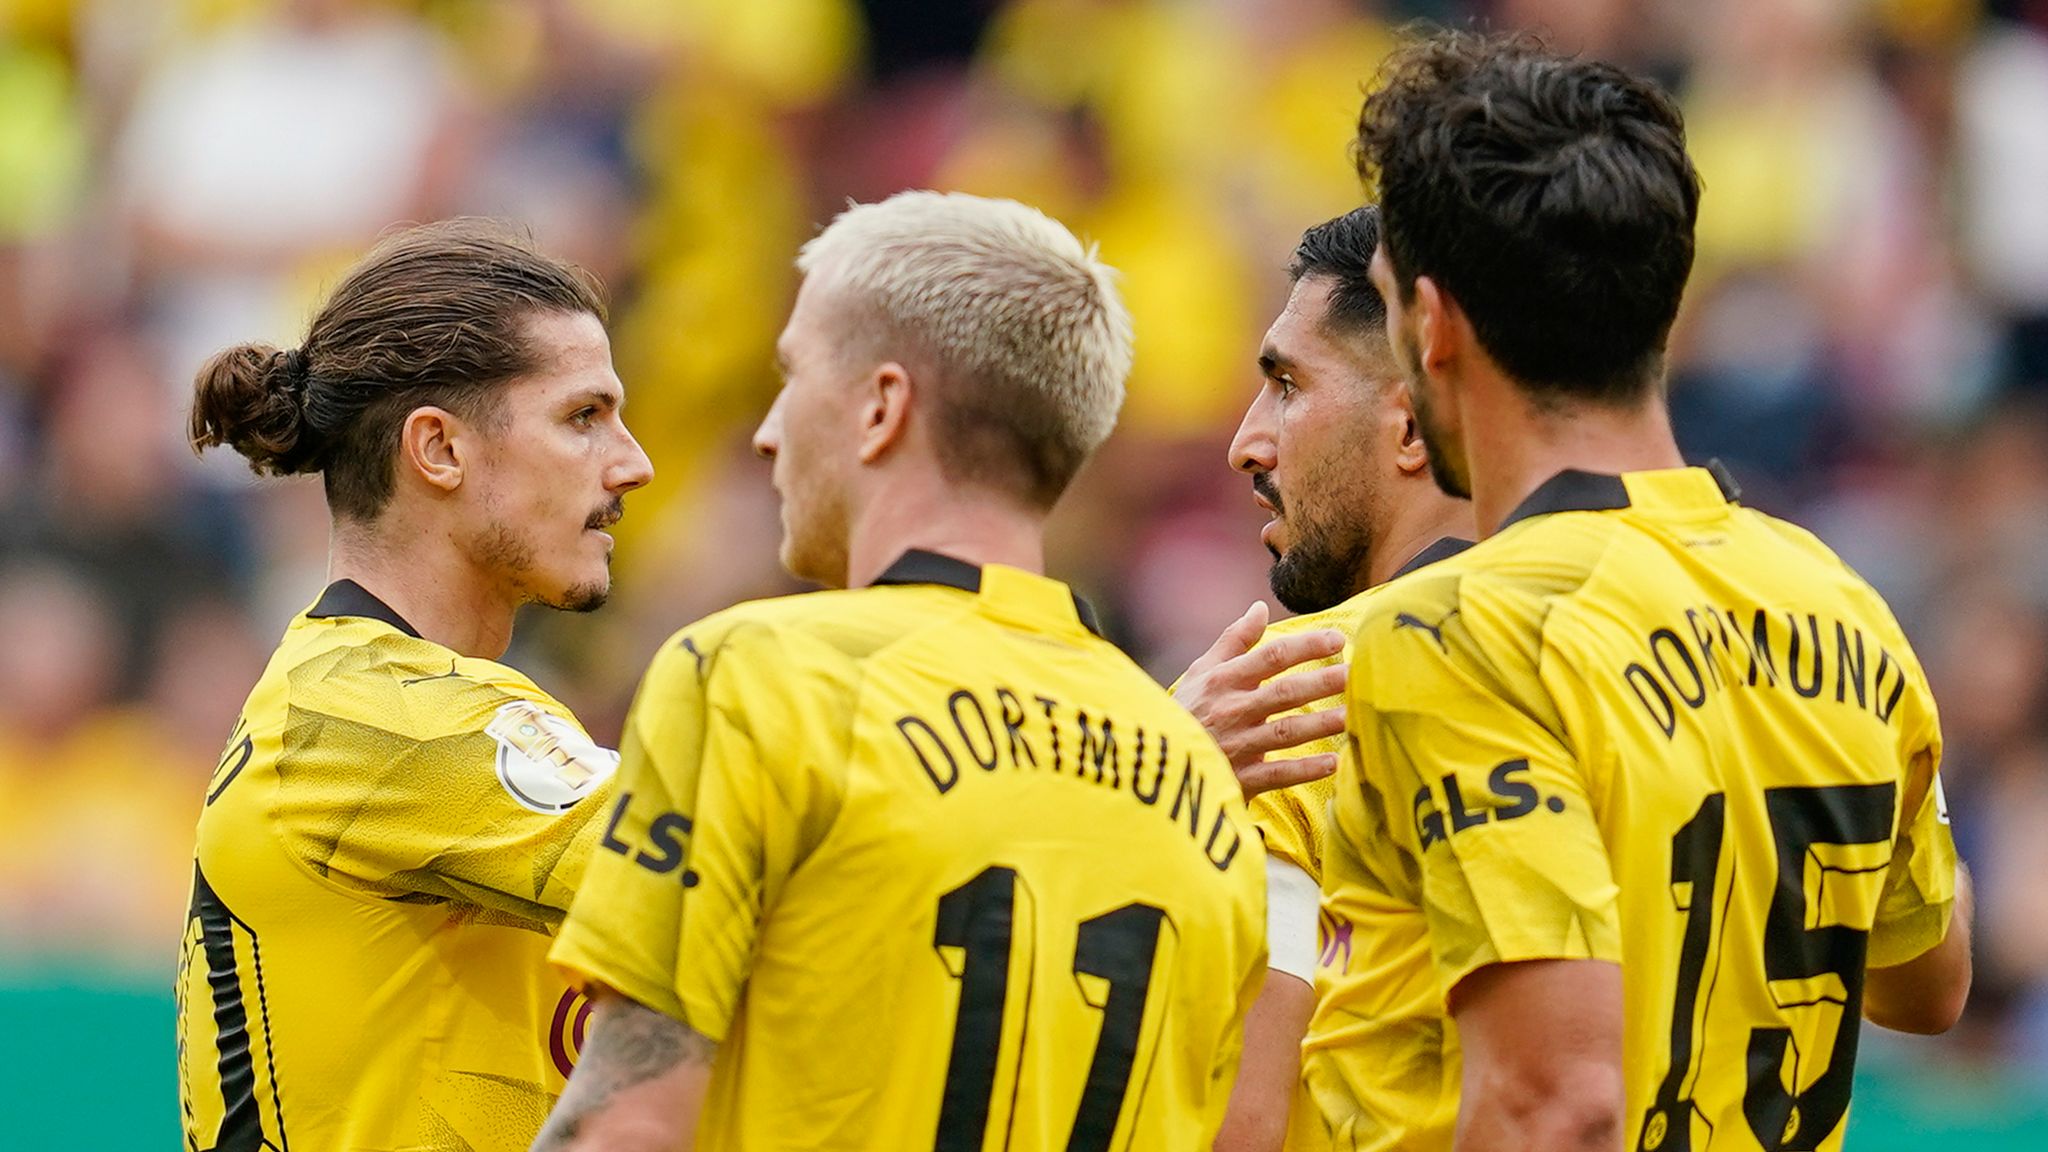 Borussia Dortmund back in Champions League race with 2-0 win over Hertha  Berlin | Football News - Times of India